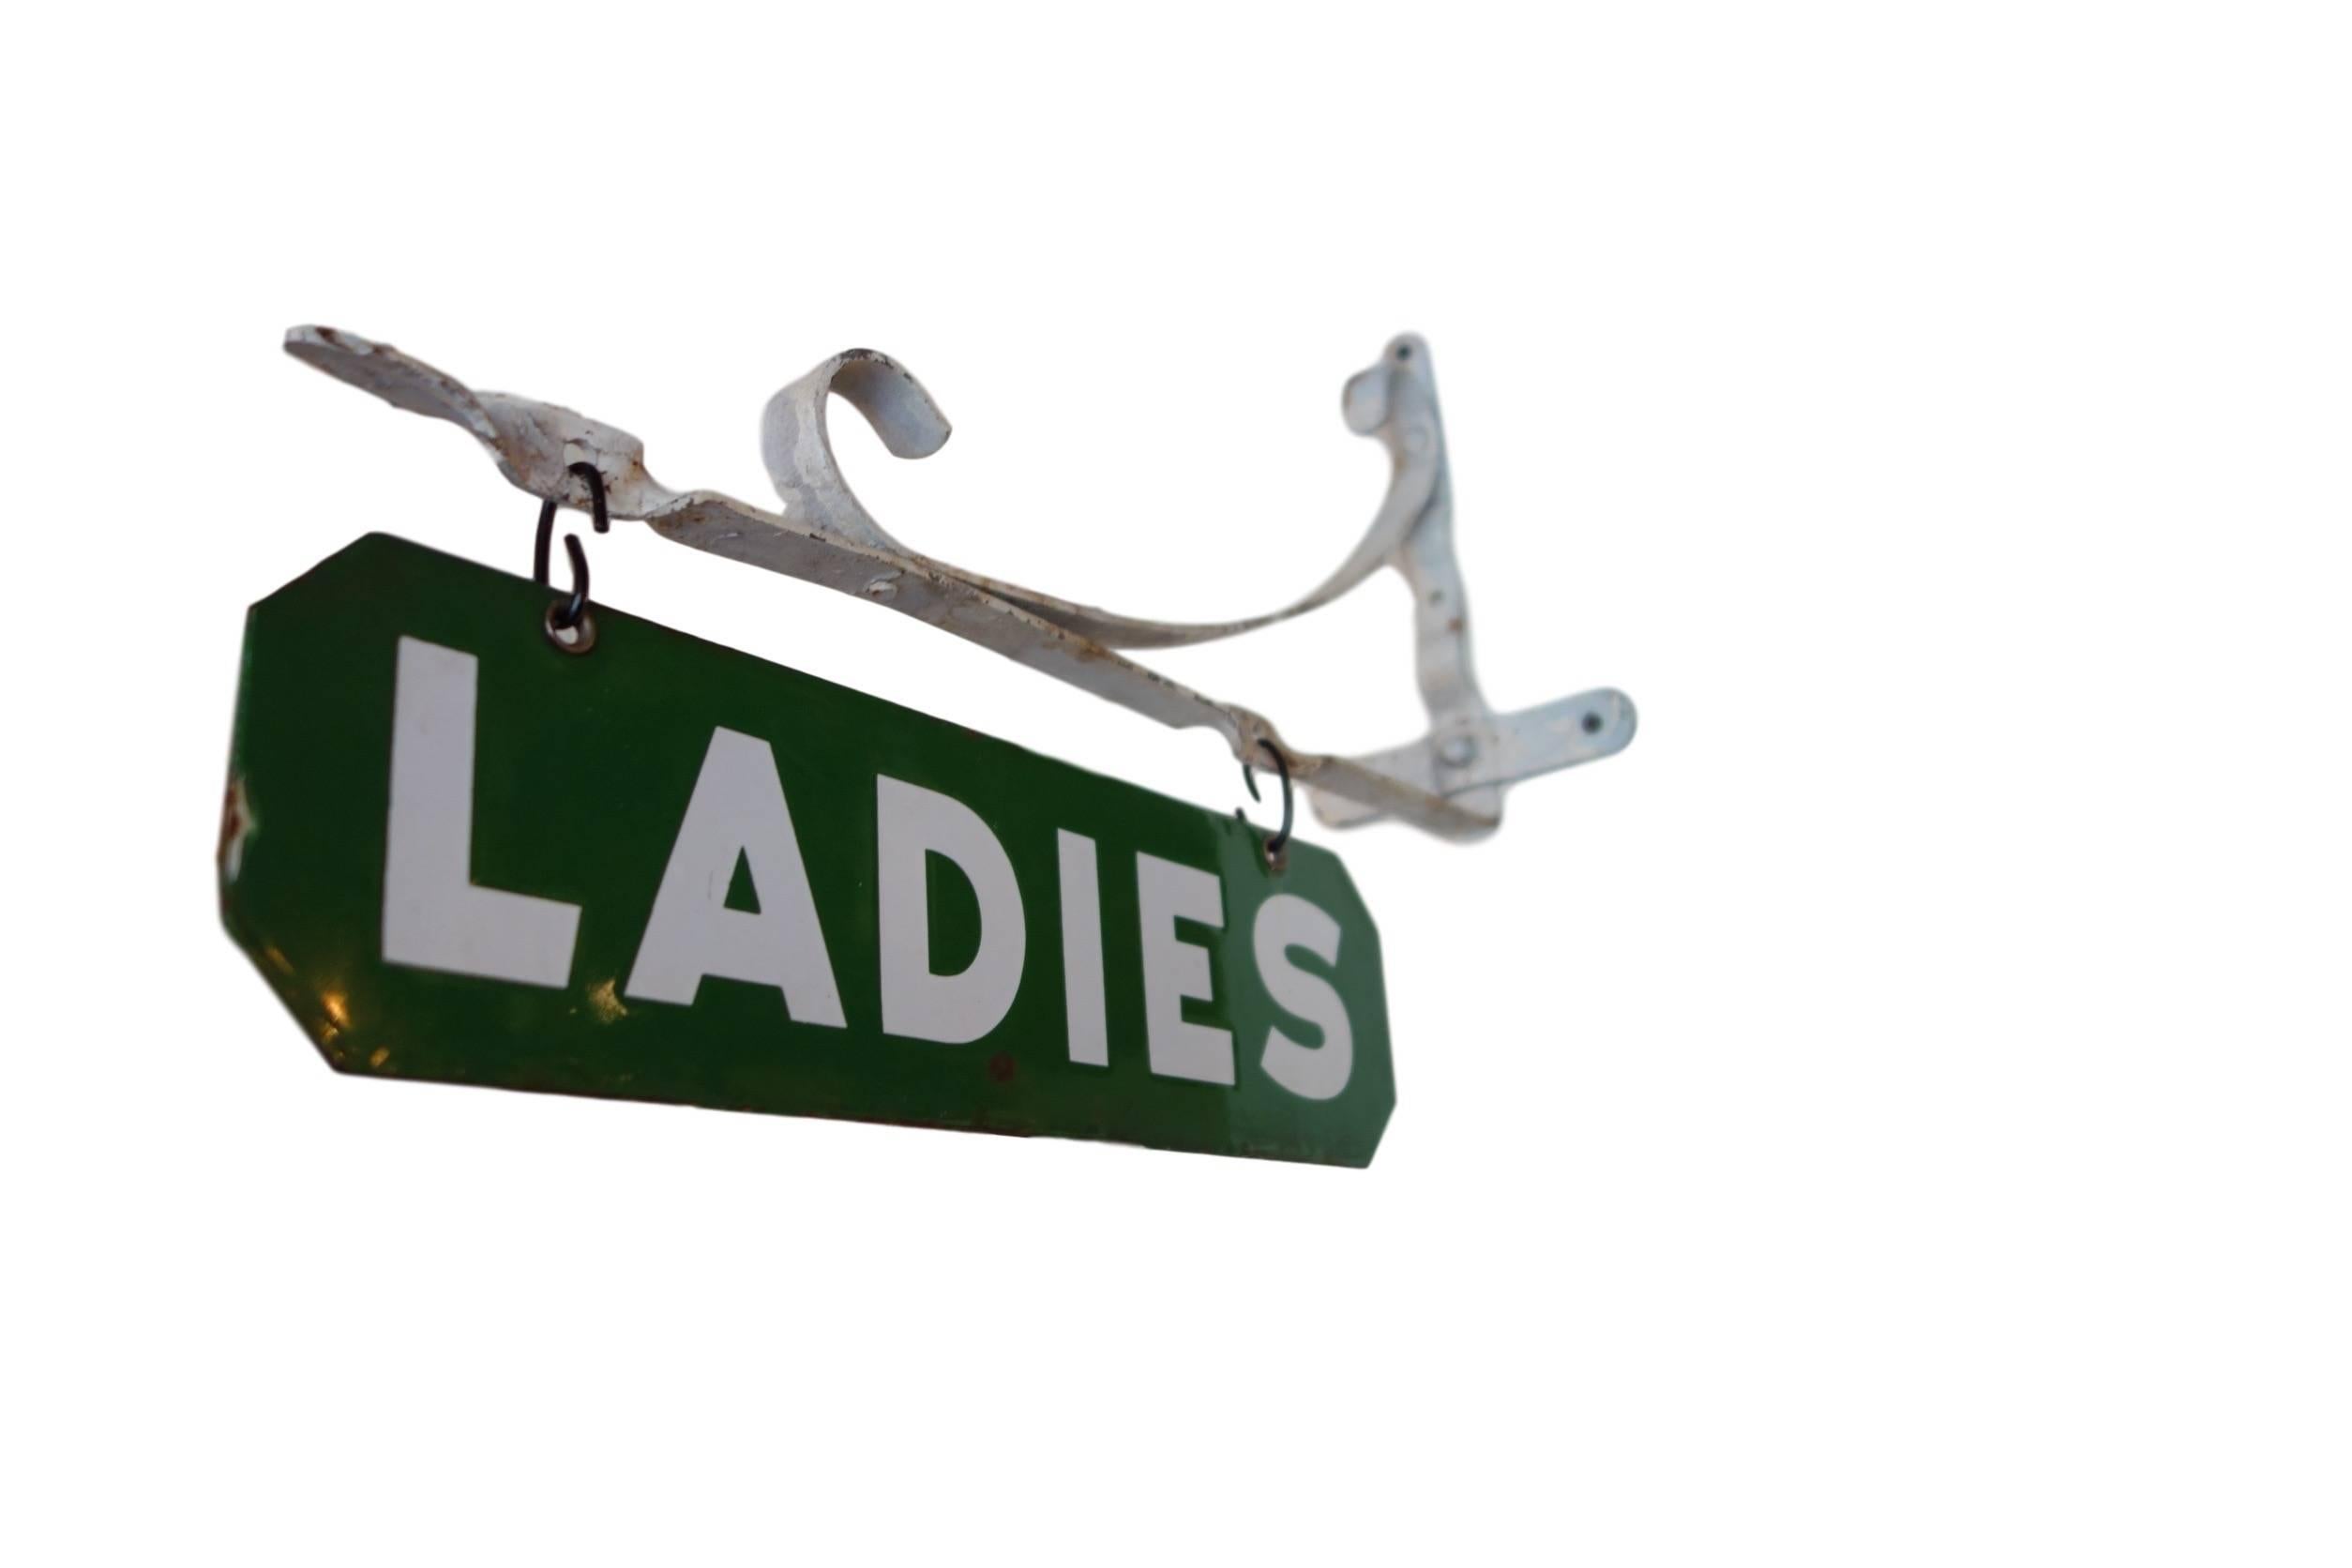 This is a double-sided porcelain 'Ladies' sign with its original wall mount bracket.
Total height 14